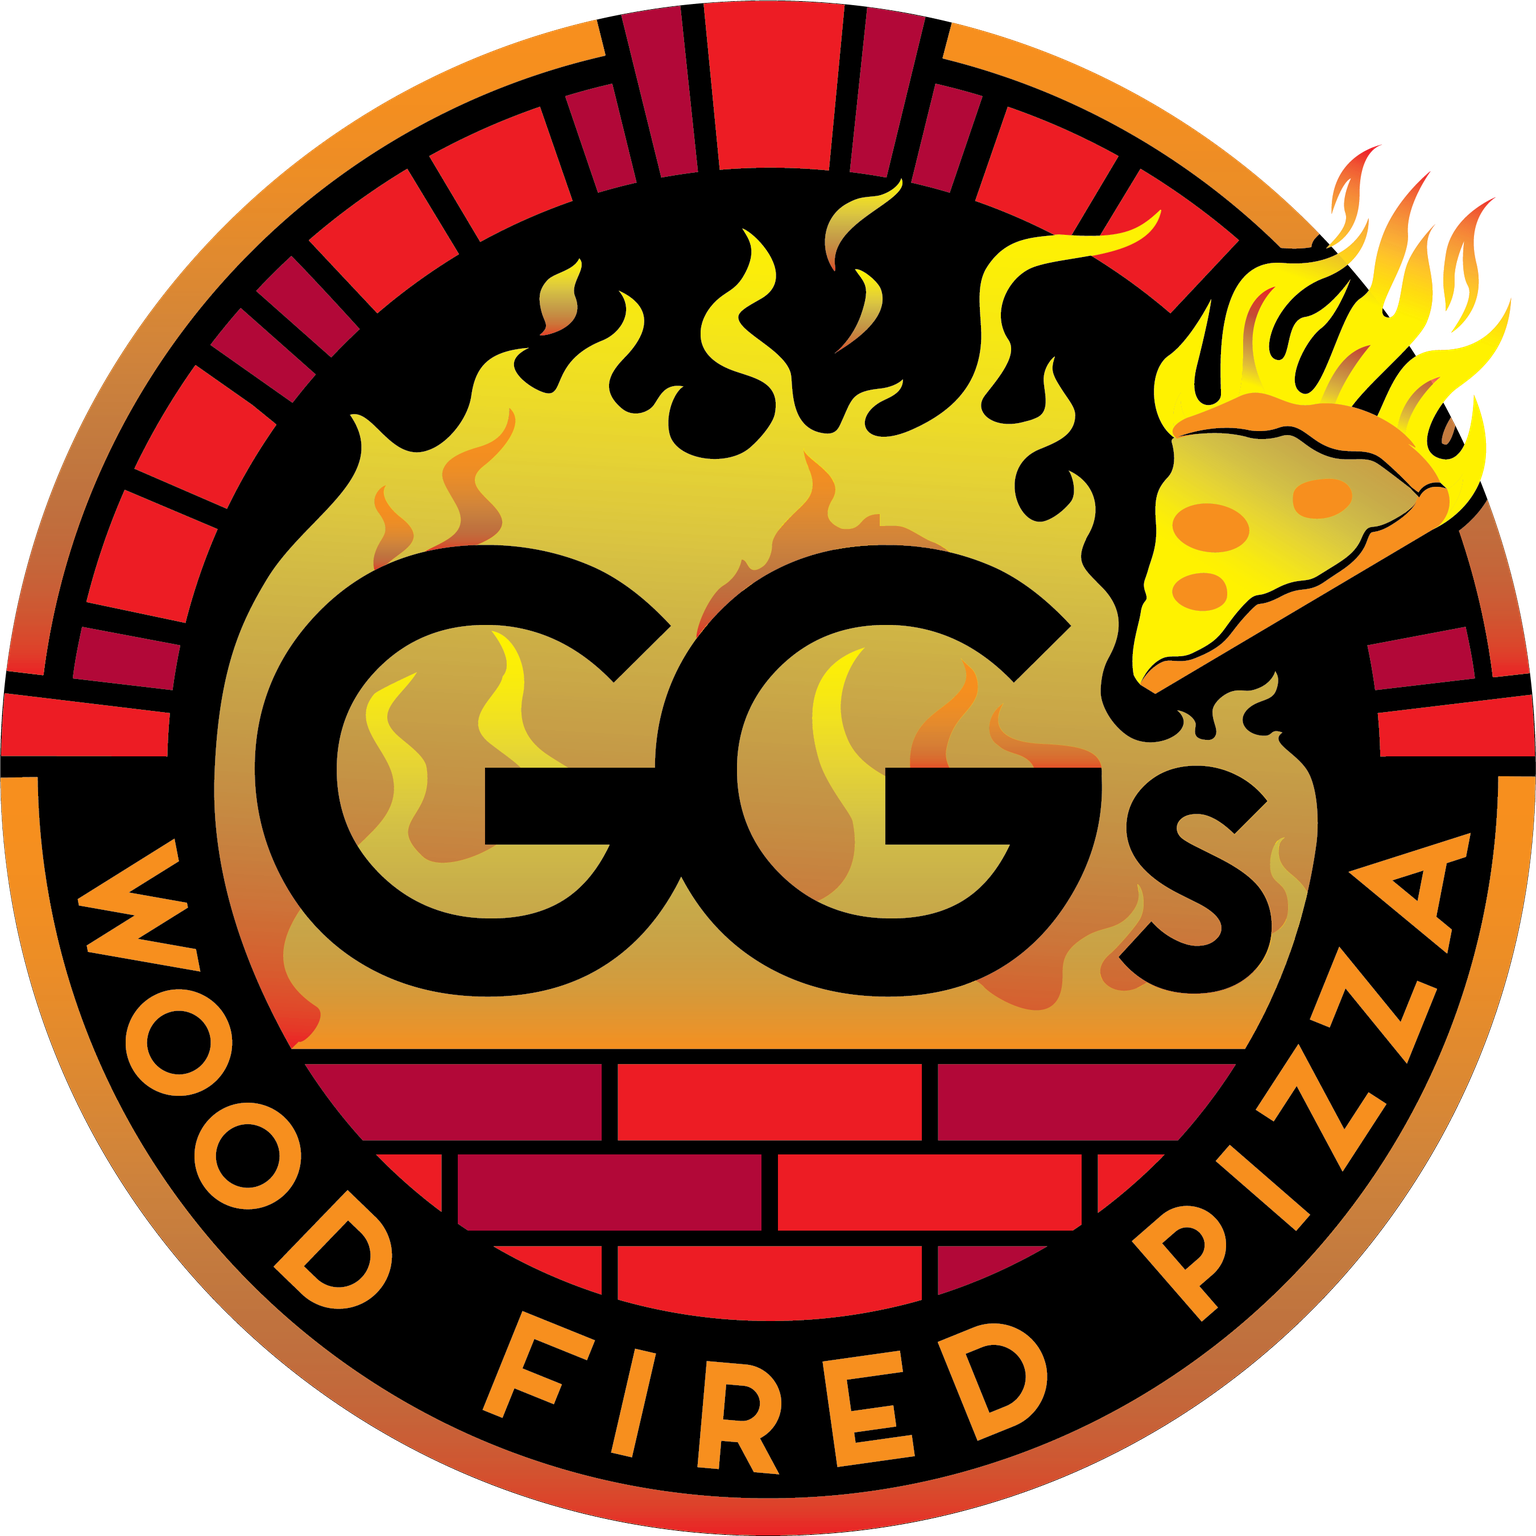 GG's Wood Fired Pizza